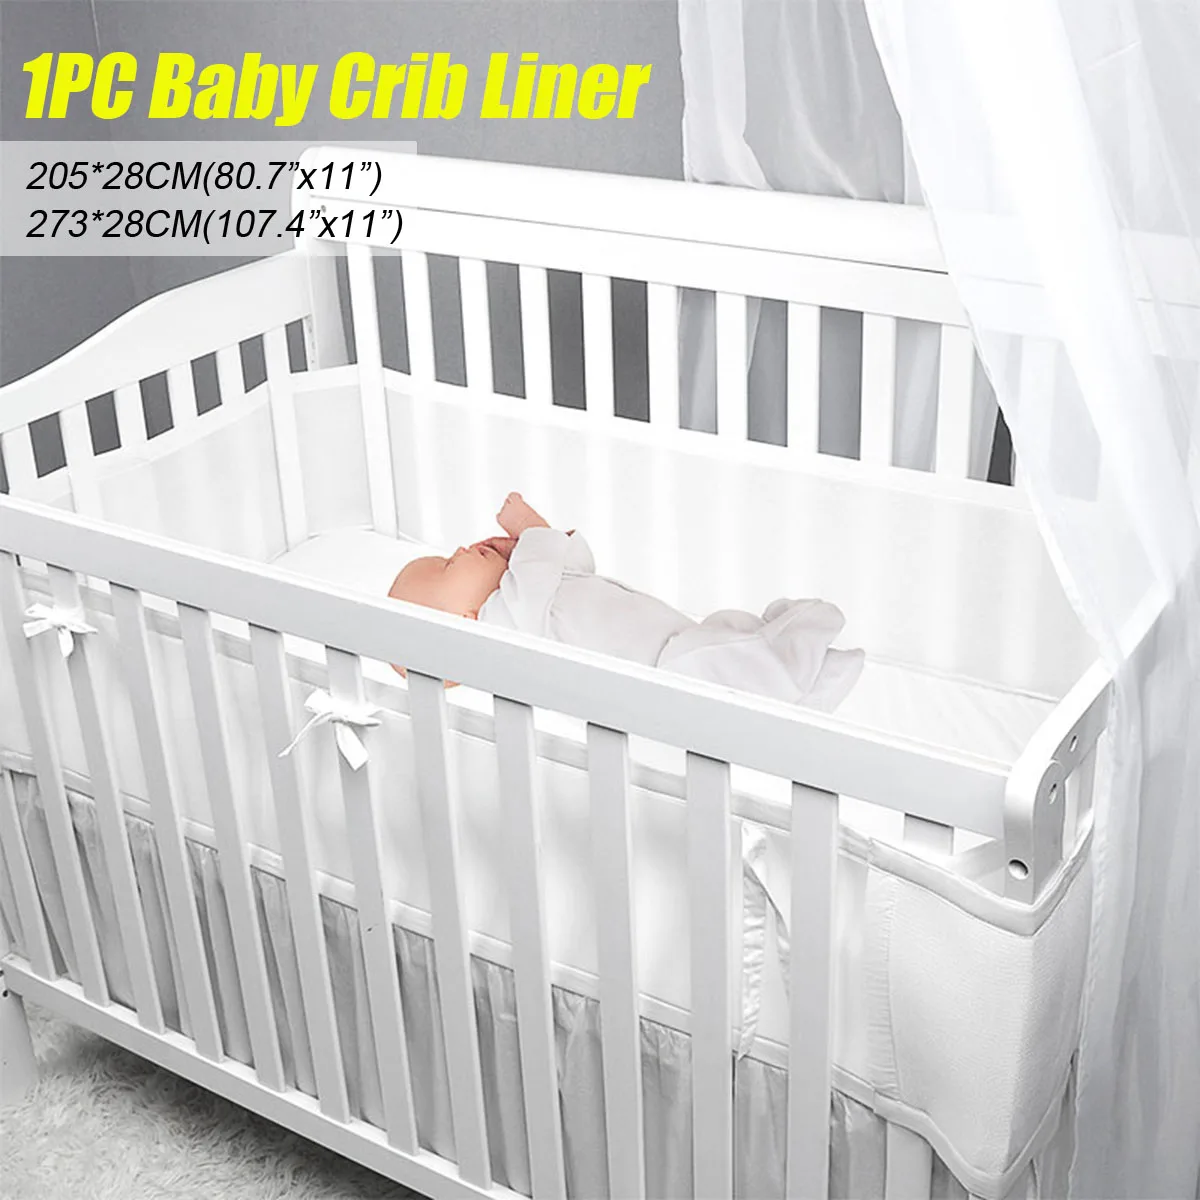 NEW Breathe Baby Breathable Air Mesh Crib Liner Wrap Nursery Cot Bed Bumper Set 